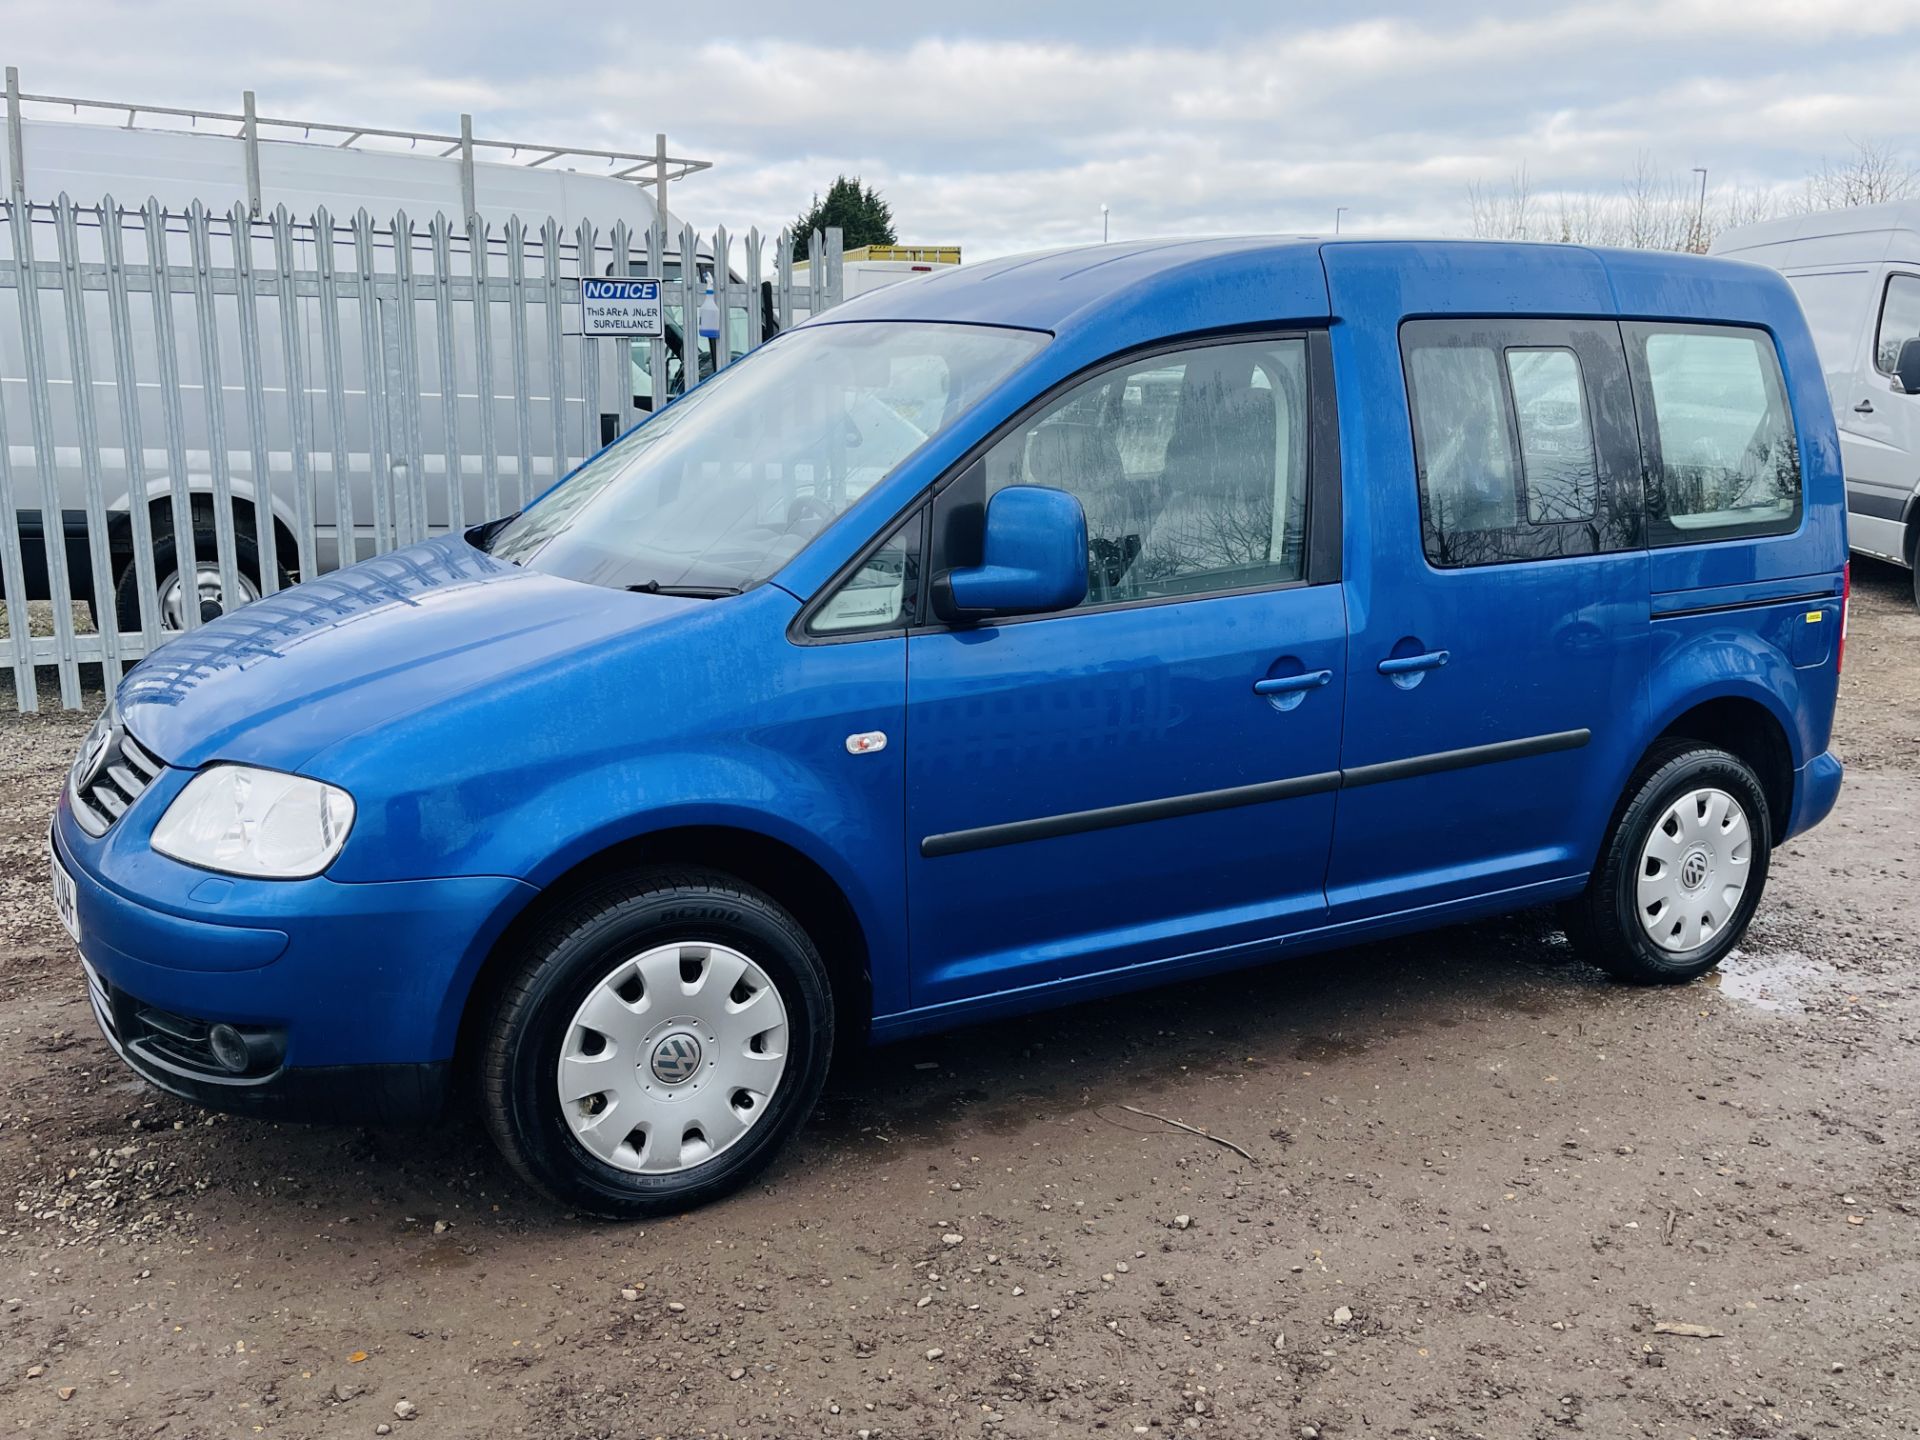 ** ON SALE ** Volkswagen Caddy Life 1.9 TDI DSG Auto 2008 '08 Reg'Air Con - Only Done 38k - - Image 6 of 24